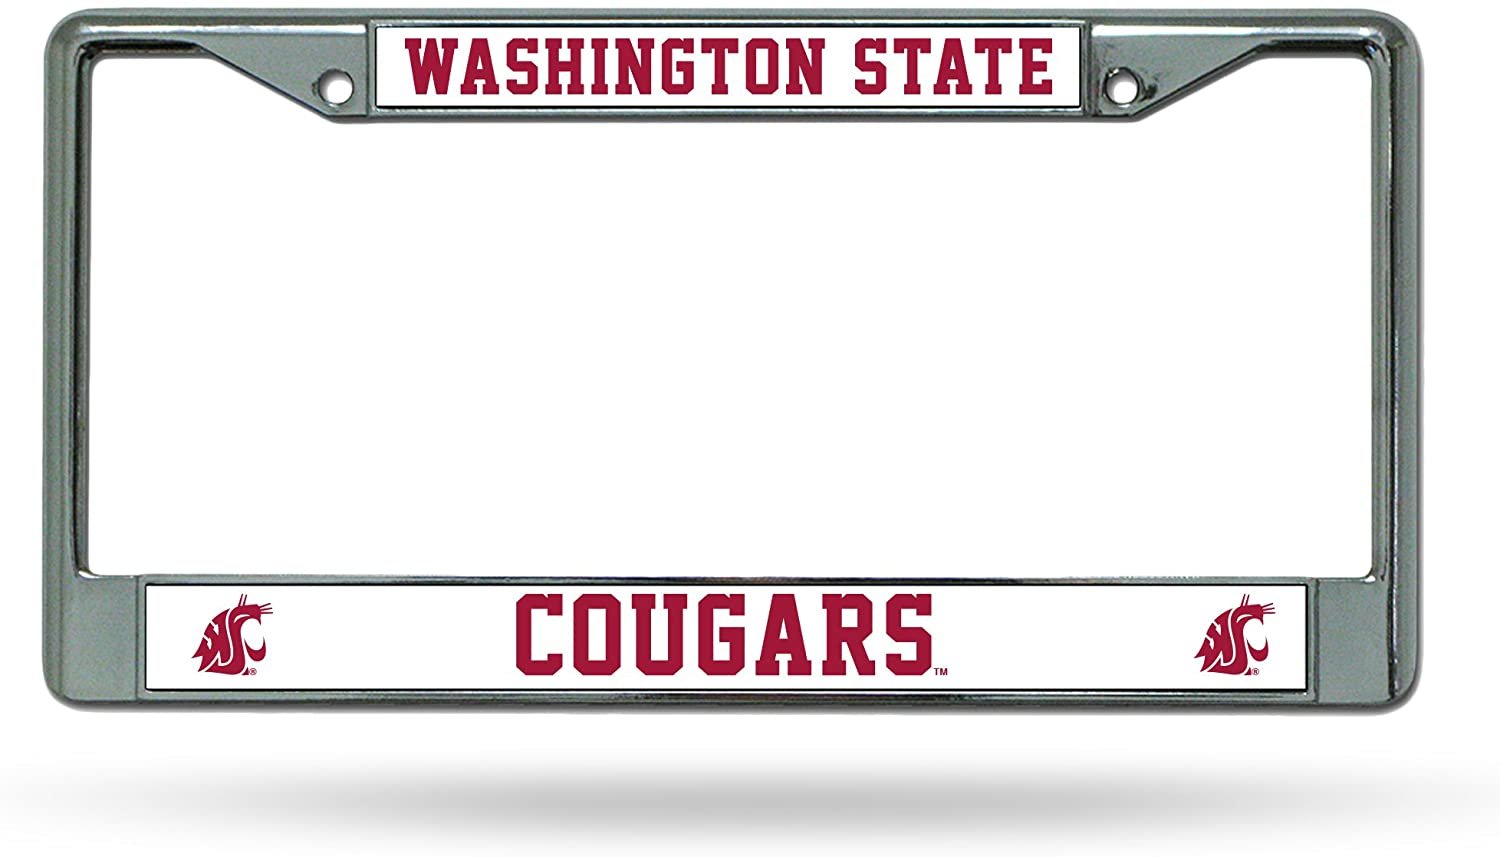 Washington State University Cougars Metal License Plate Frame Chrome Tag Cover, 12x6 Inch